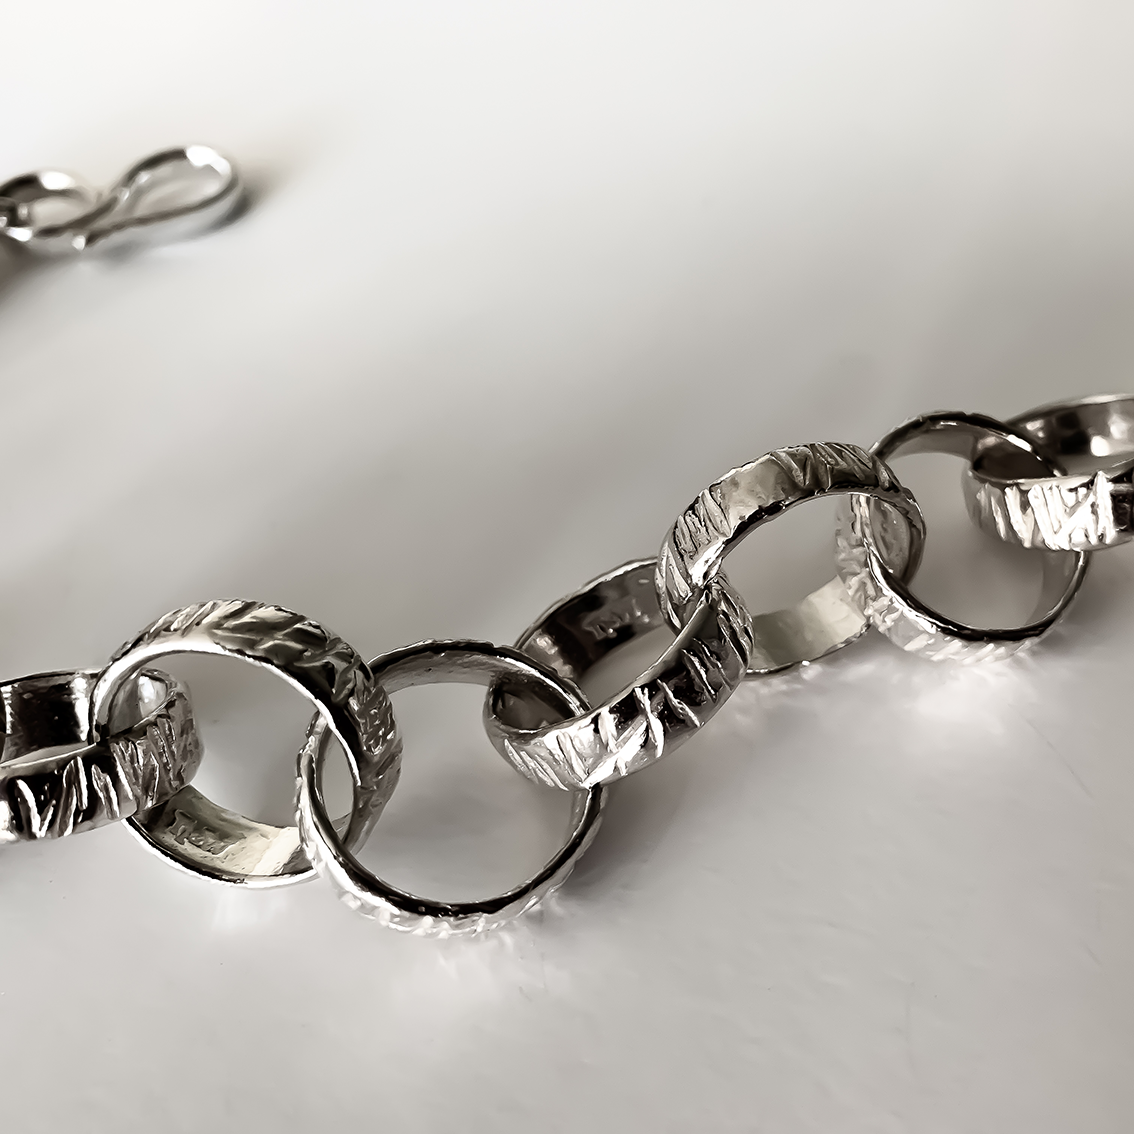 Counting Giants - Heavy Circle Link Chain Bracelet - Sterling Silver + Bronze